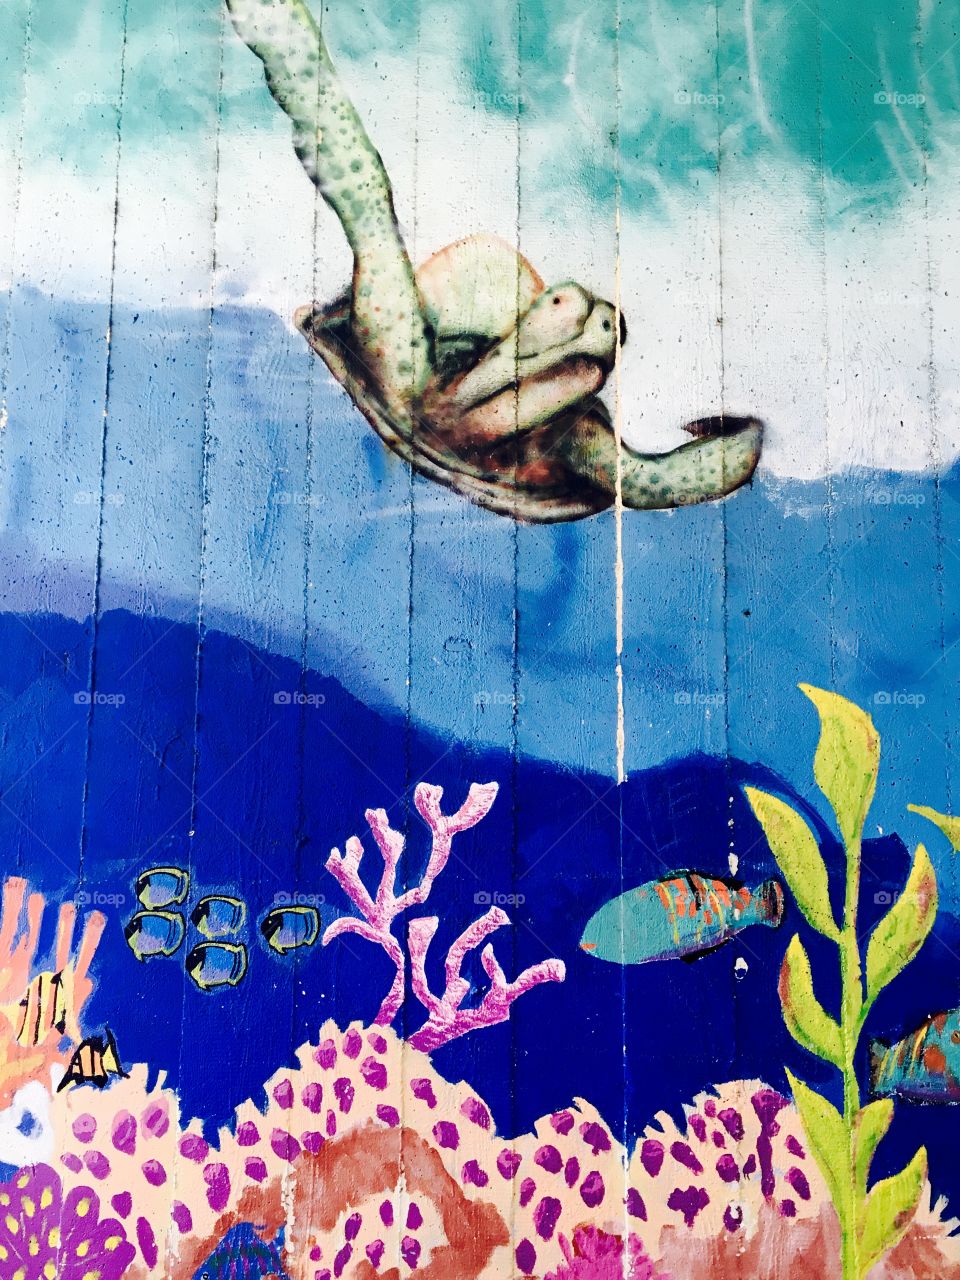 Under the Sea mural 